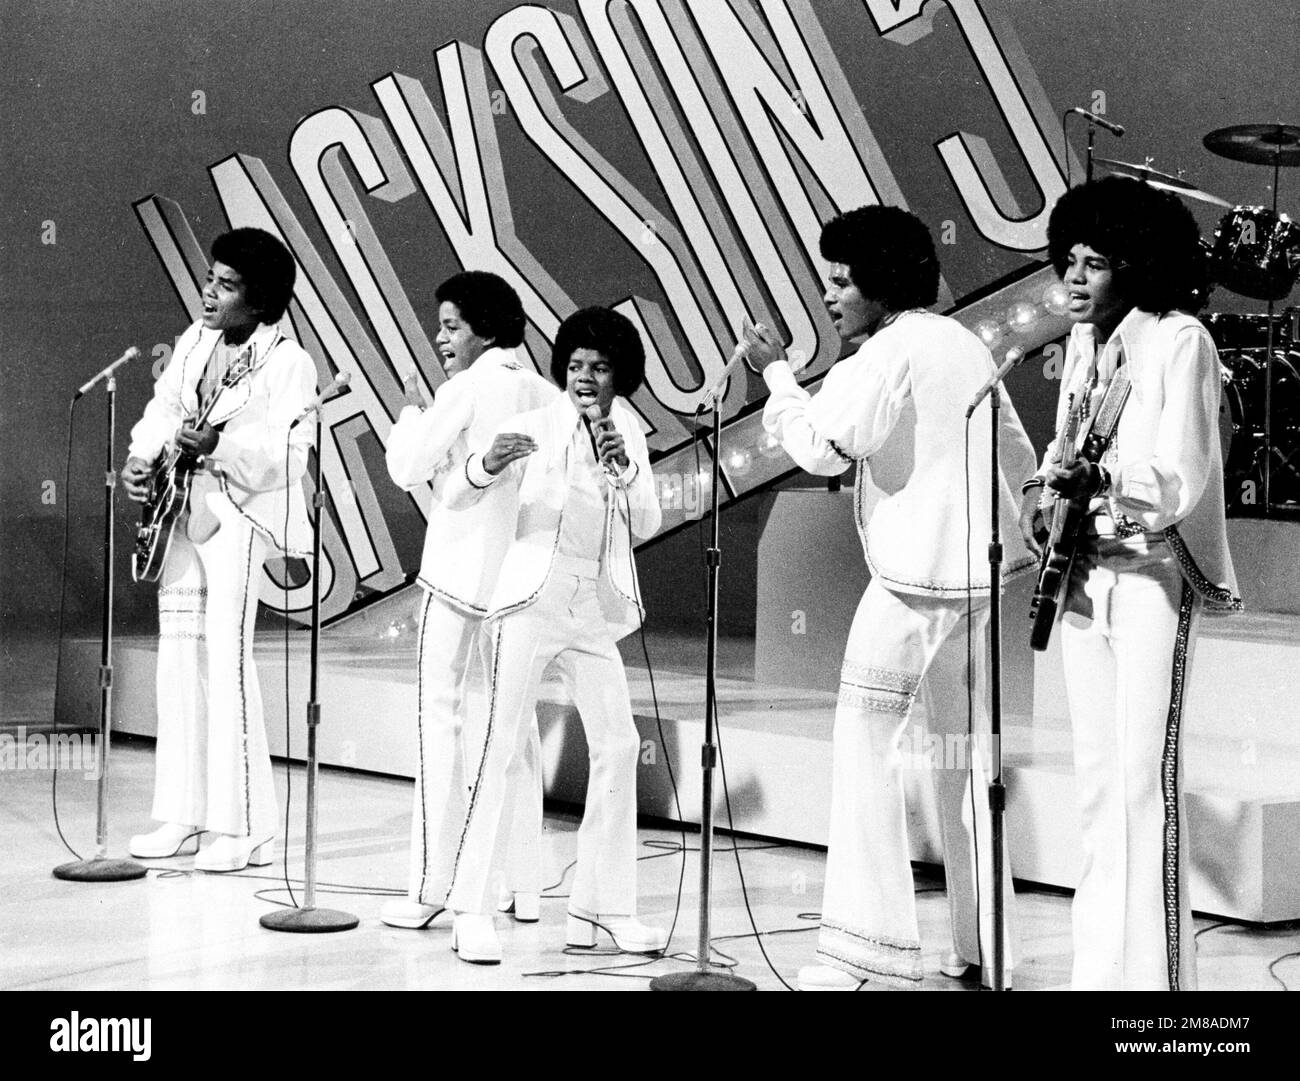 JERMAINE JACKSON, MICHAEL JACKSON, TITO JACKSON, MARLON JACKSON, JACKIE JACKSON and JACKSON 5 in THE SONNY AND CHER COMEDY HOUR (1971), directed by ART FISHER. Credit: Columbia Broadcasting System (CBS) / Album Stock Photo